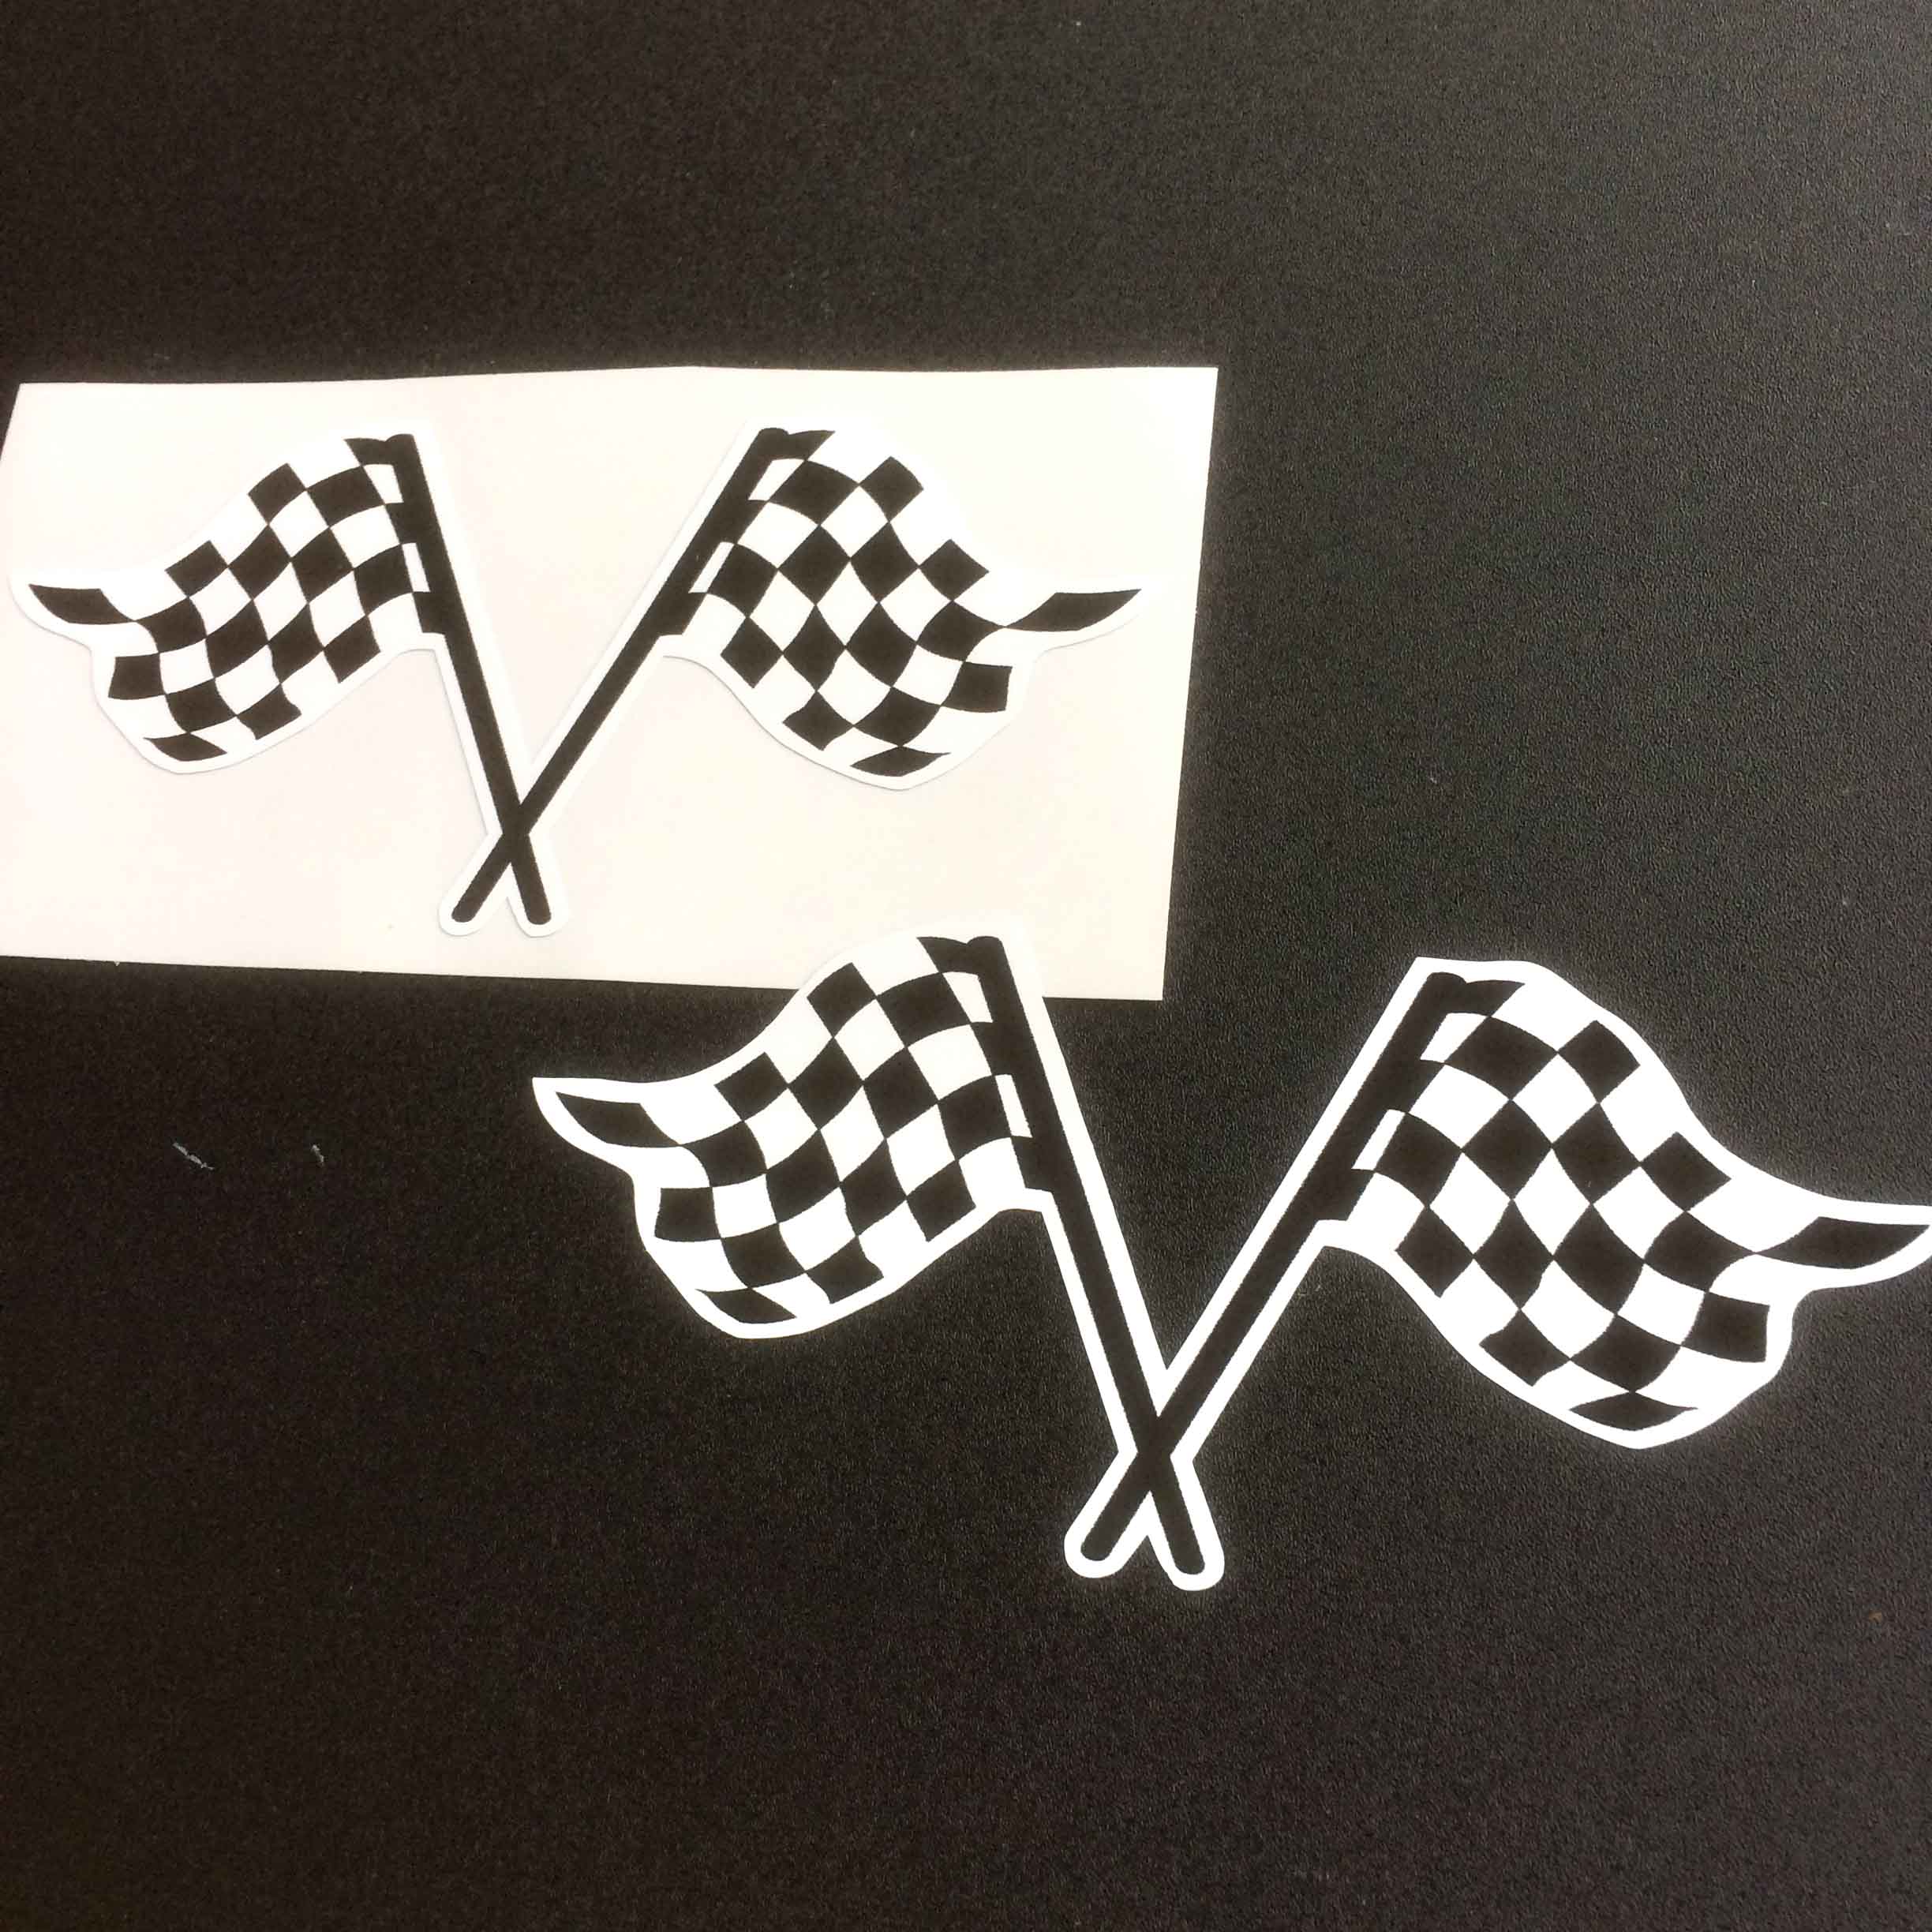 Two crossed black and white chequered flags on poles.